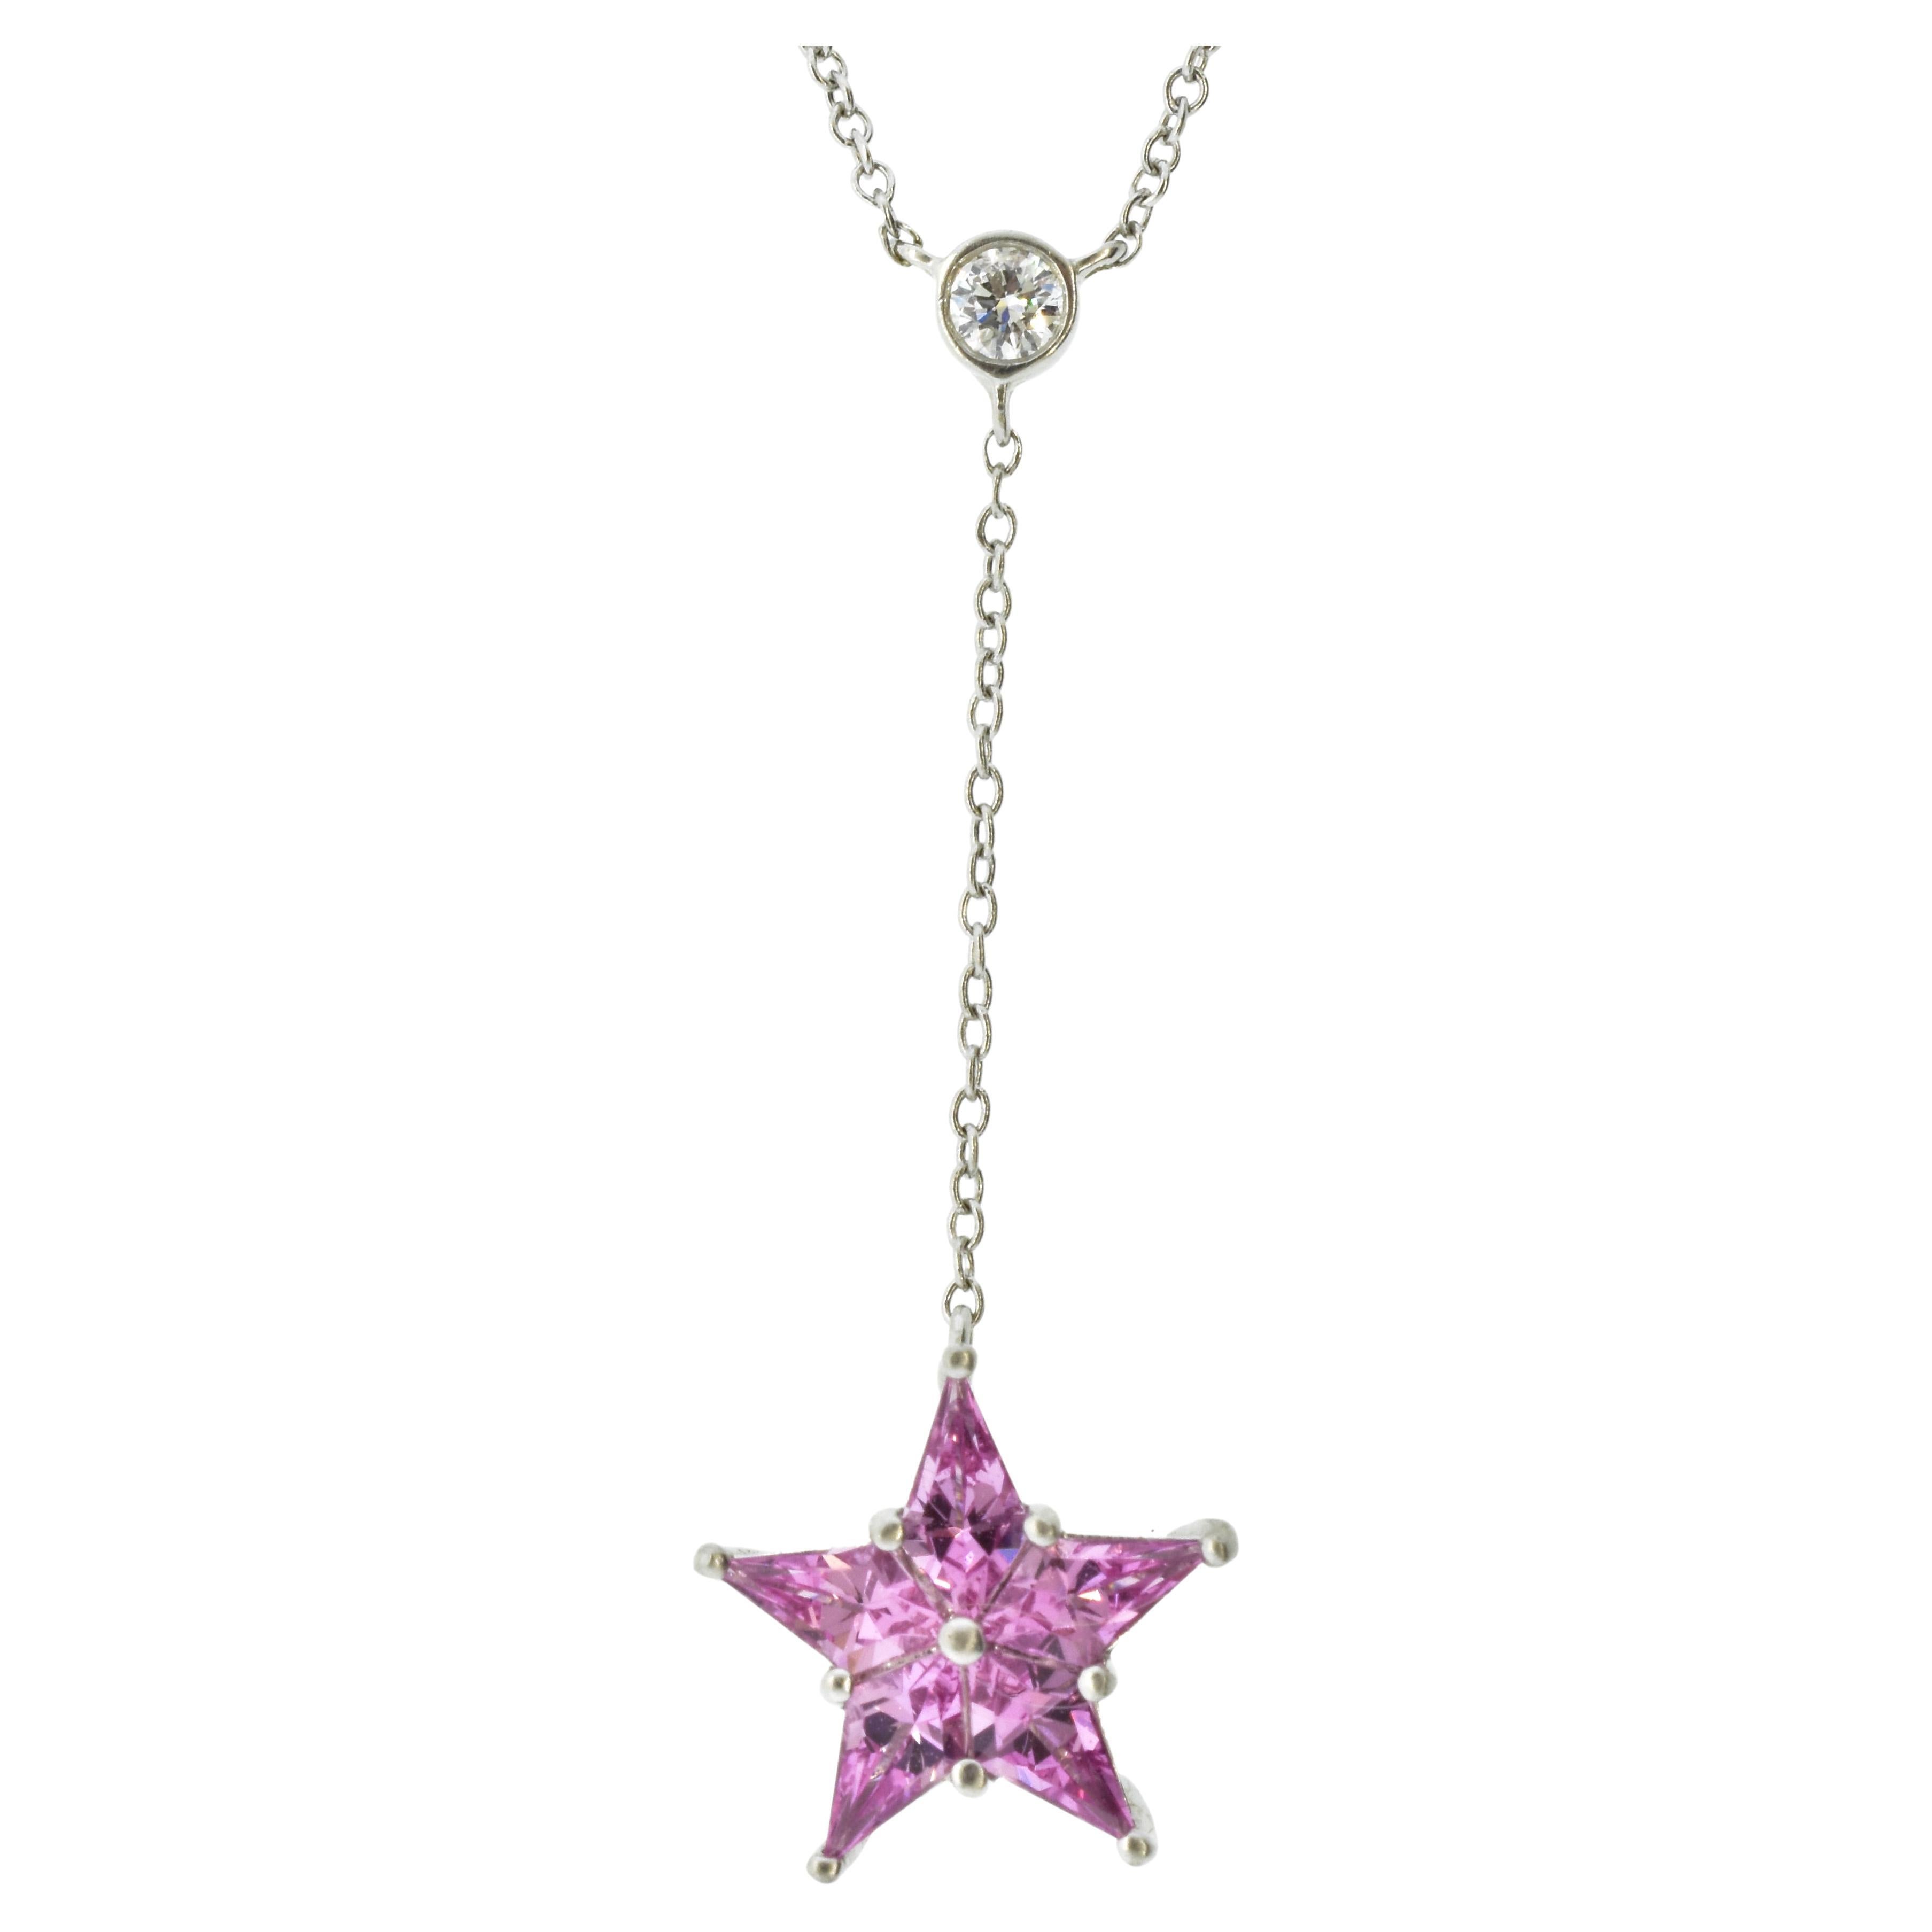 Tiffany 18K white gold necklace terminating with a pendant of pink sapphires set in a star motif.  The platinum  star pendant is suspended from a fine, collet set diamond, weighing approximately .10 cts., near colorless, (G) and very slightly